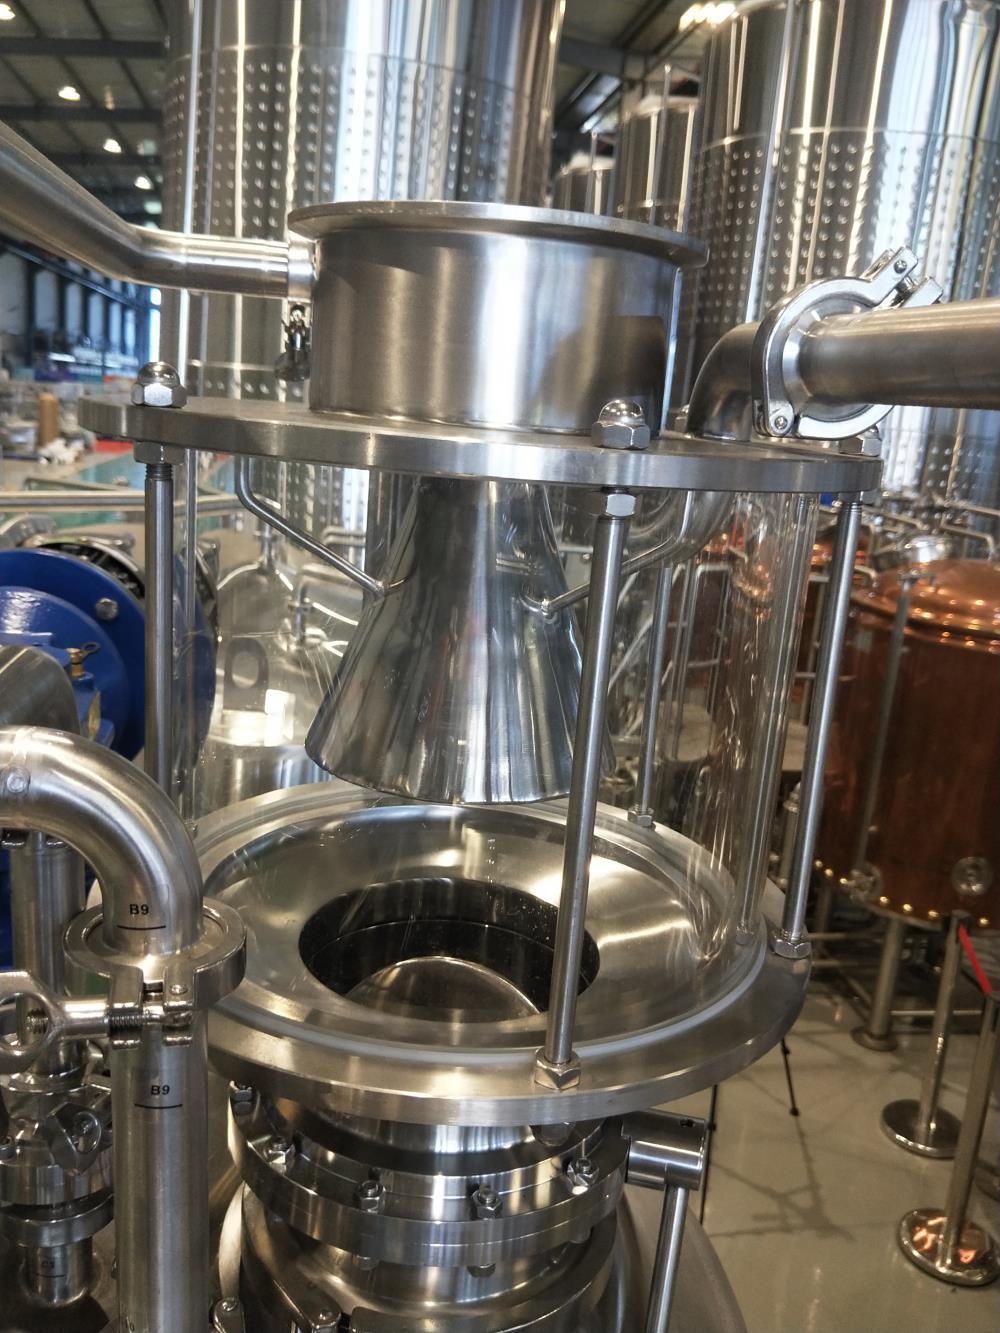 Which kind of grist hydrator you will use for brewhouse